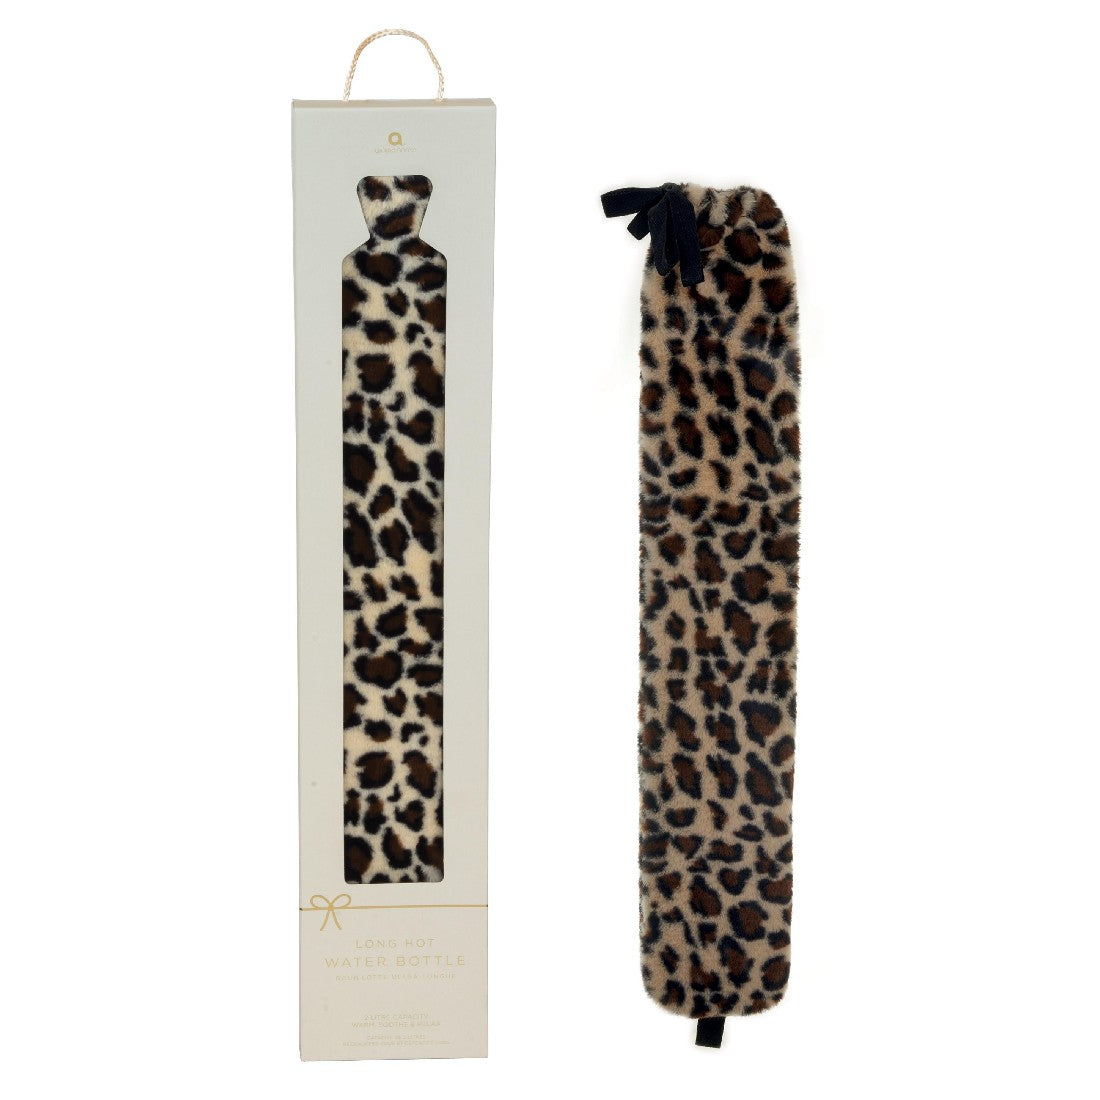 Aroma Home Long Hot Water Bottle Leopard Print 12x2.5x76.5cm